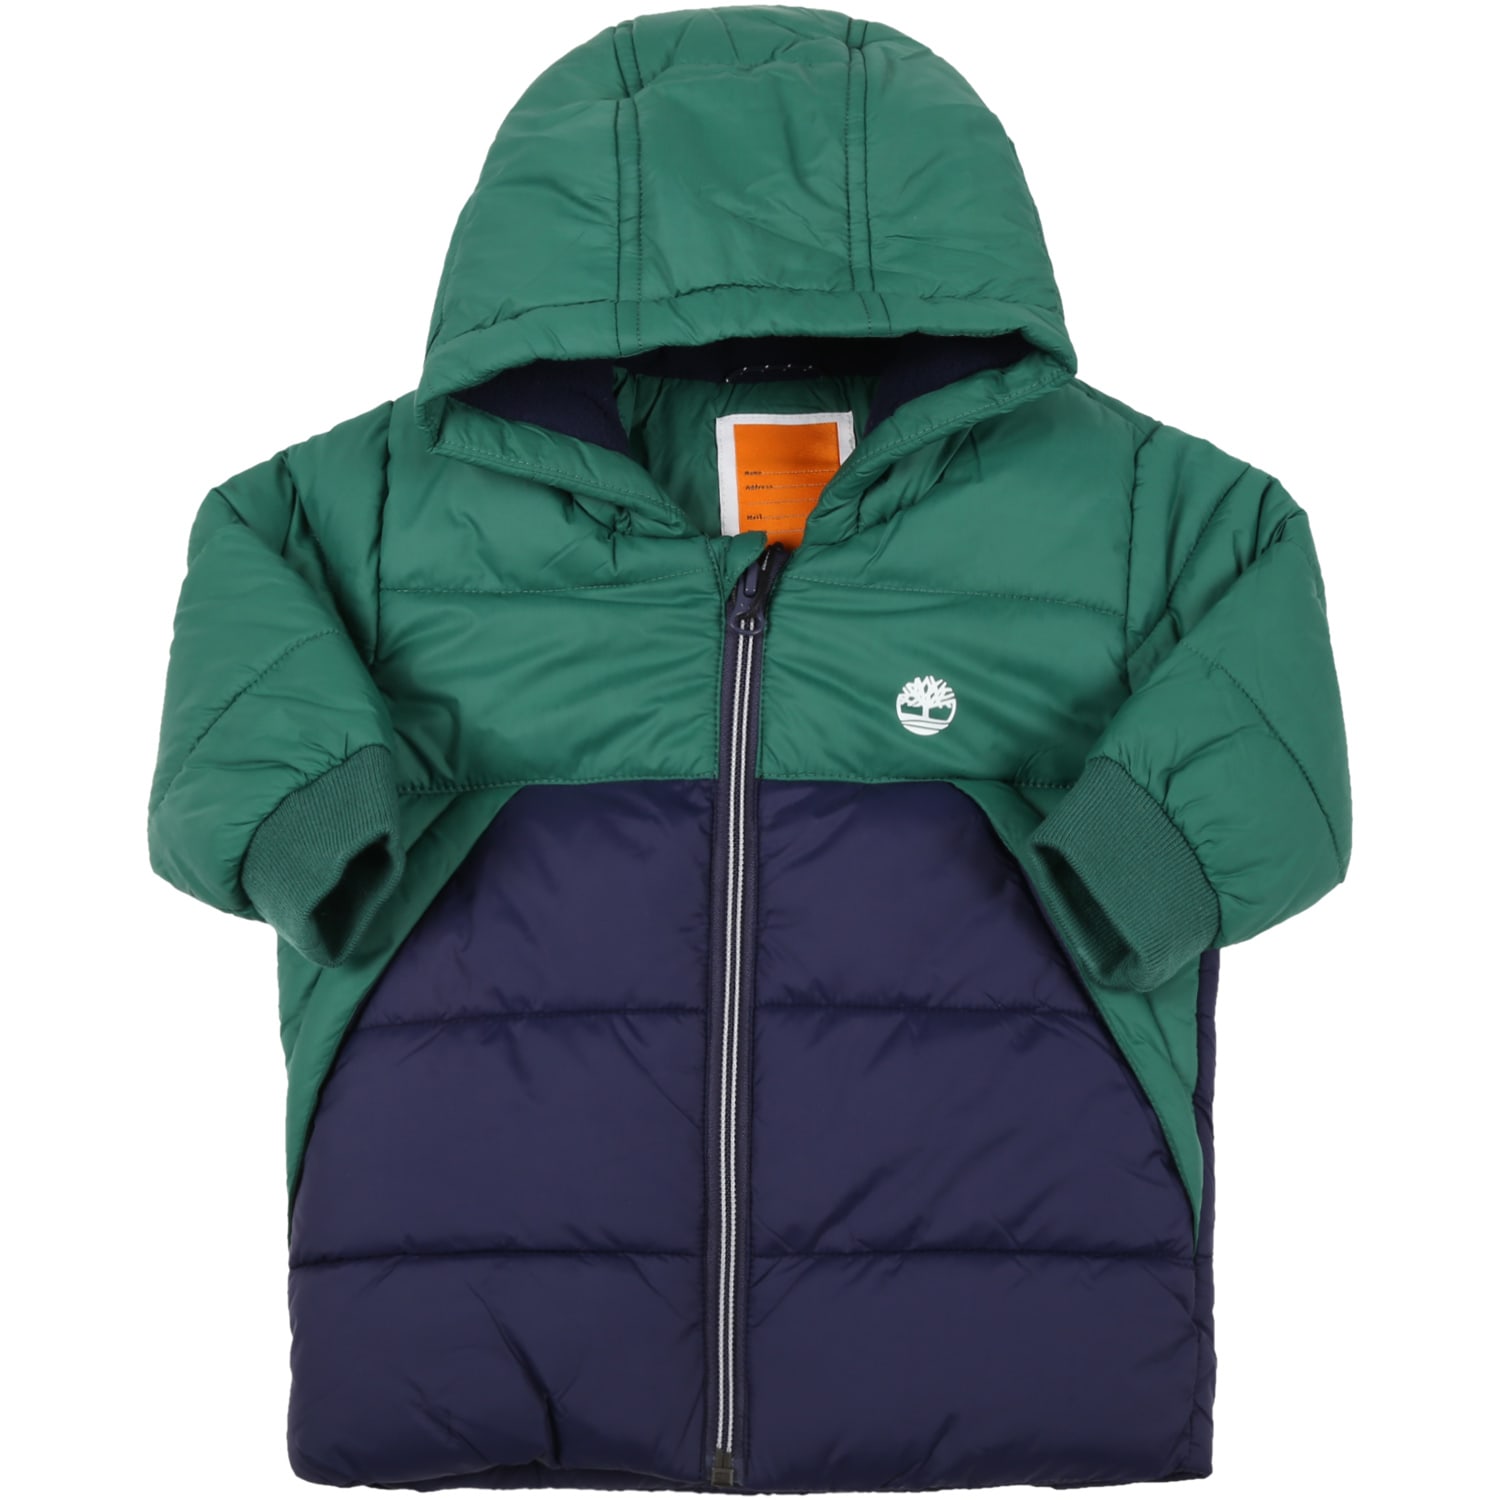 Timberland Green Jacket For Baby Boy With White Logo